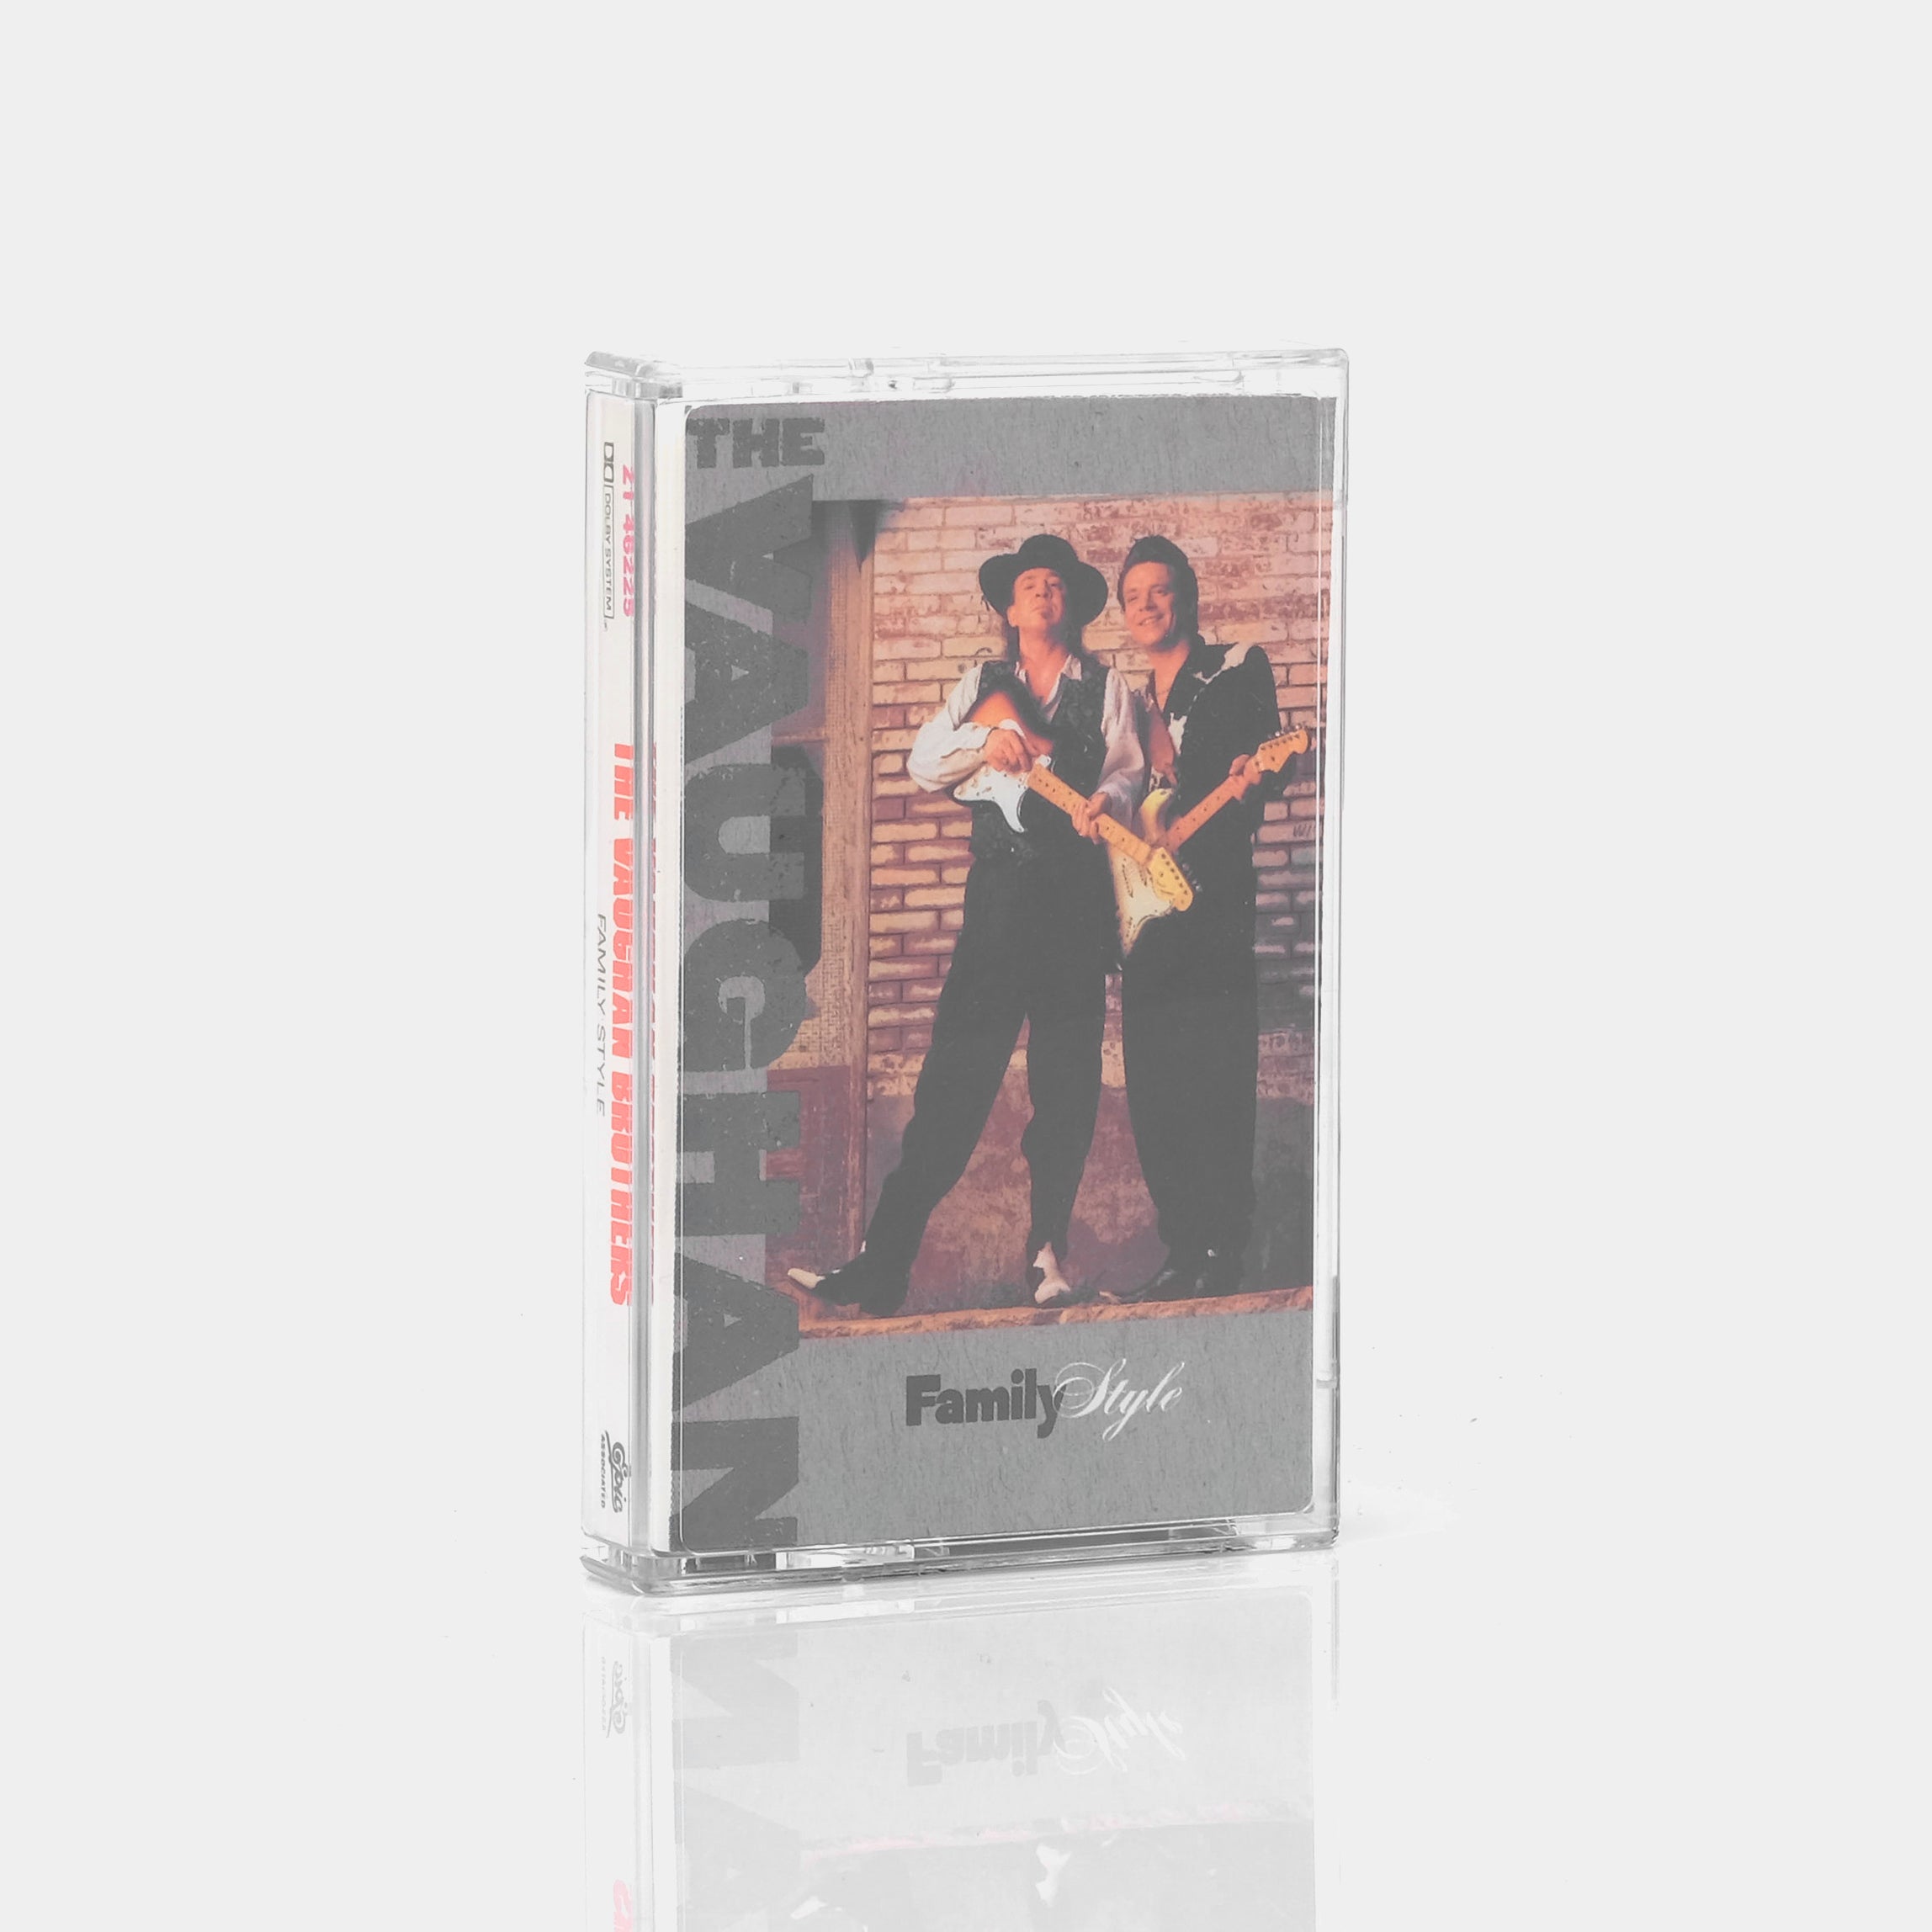 The Vaughan Brothers - Family Style Cassette Tape